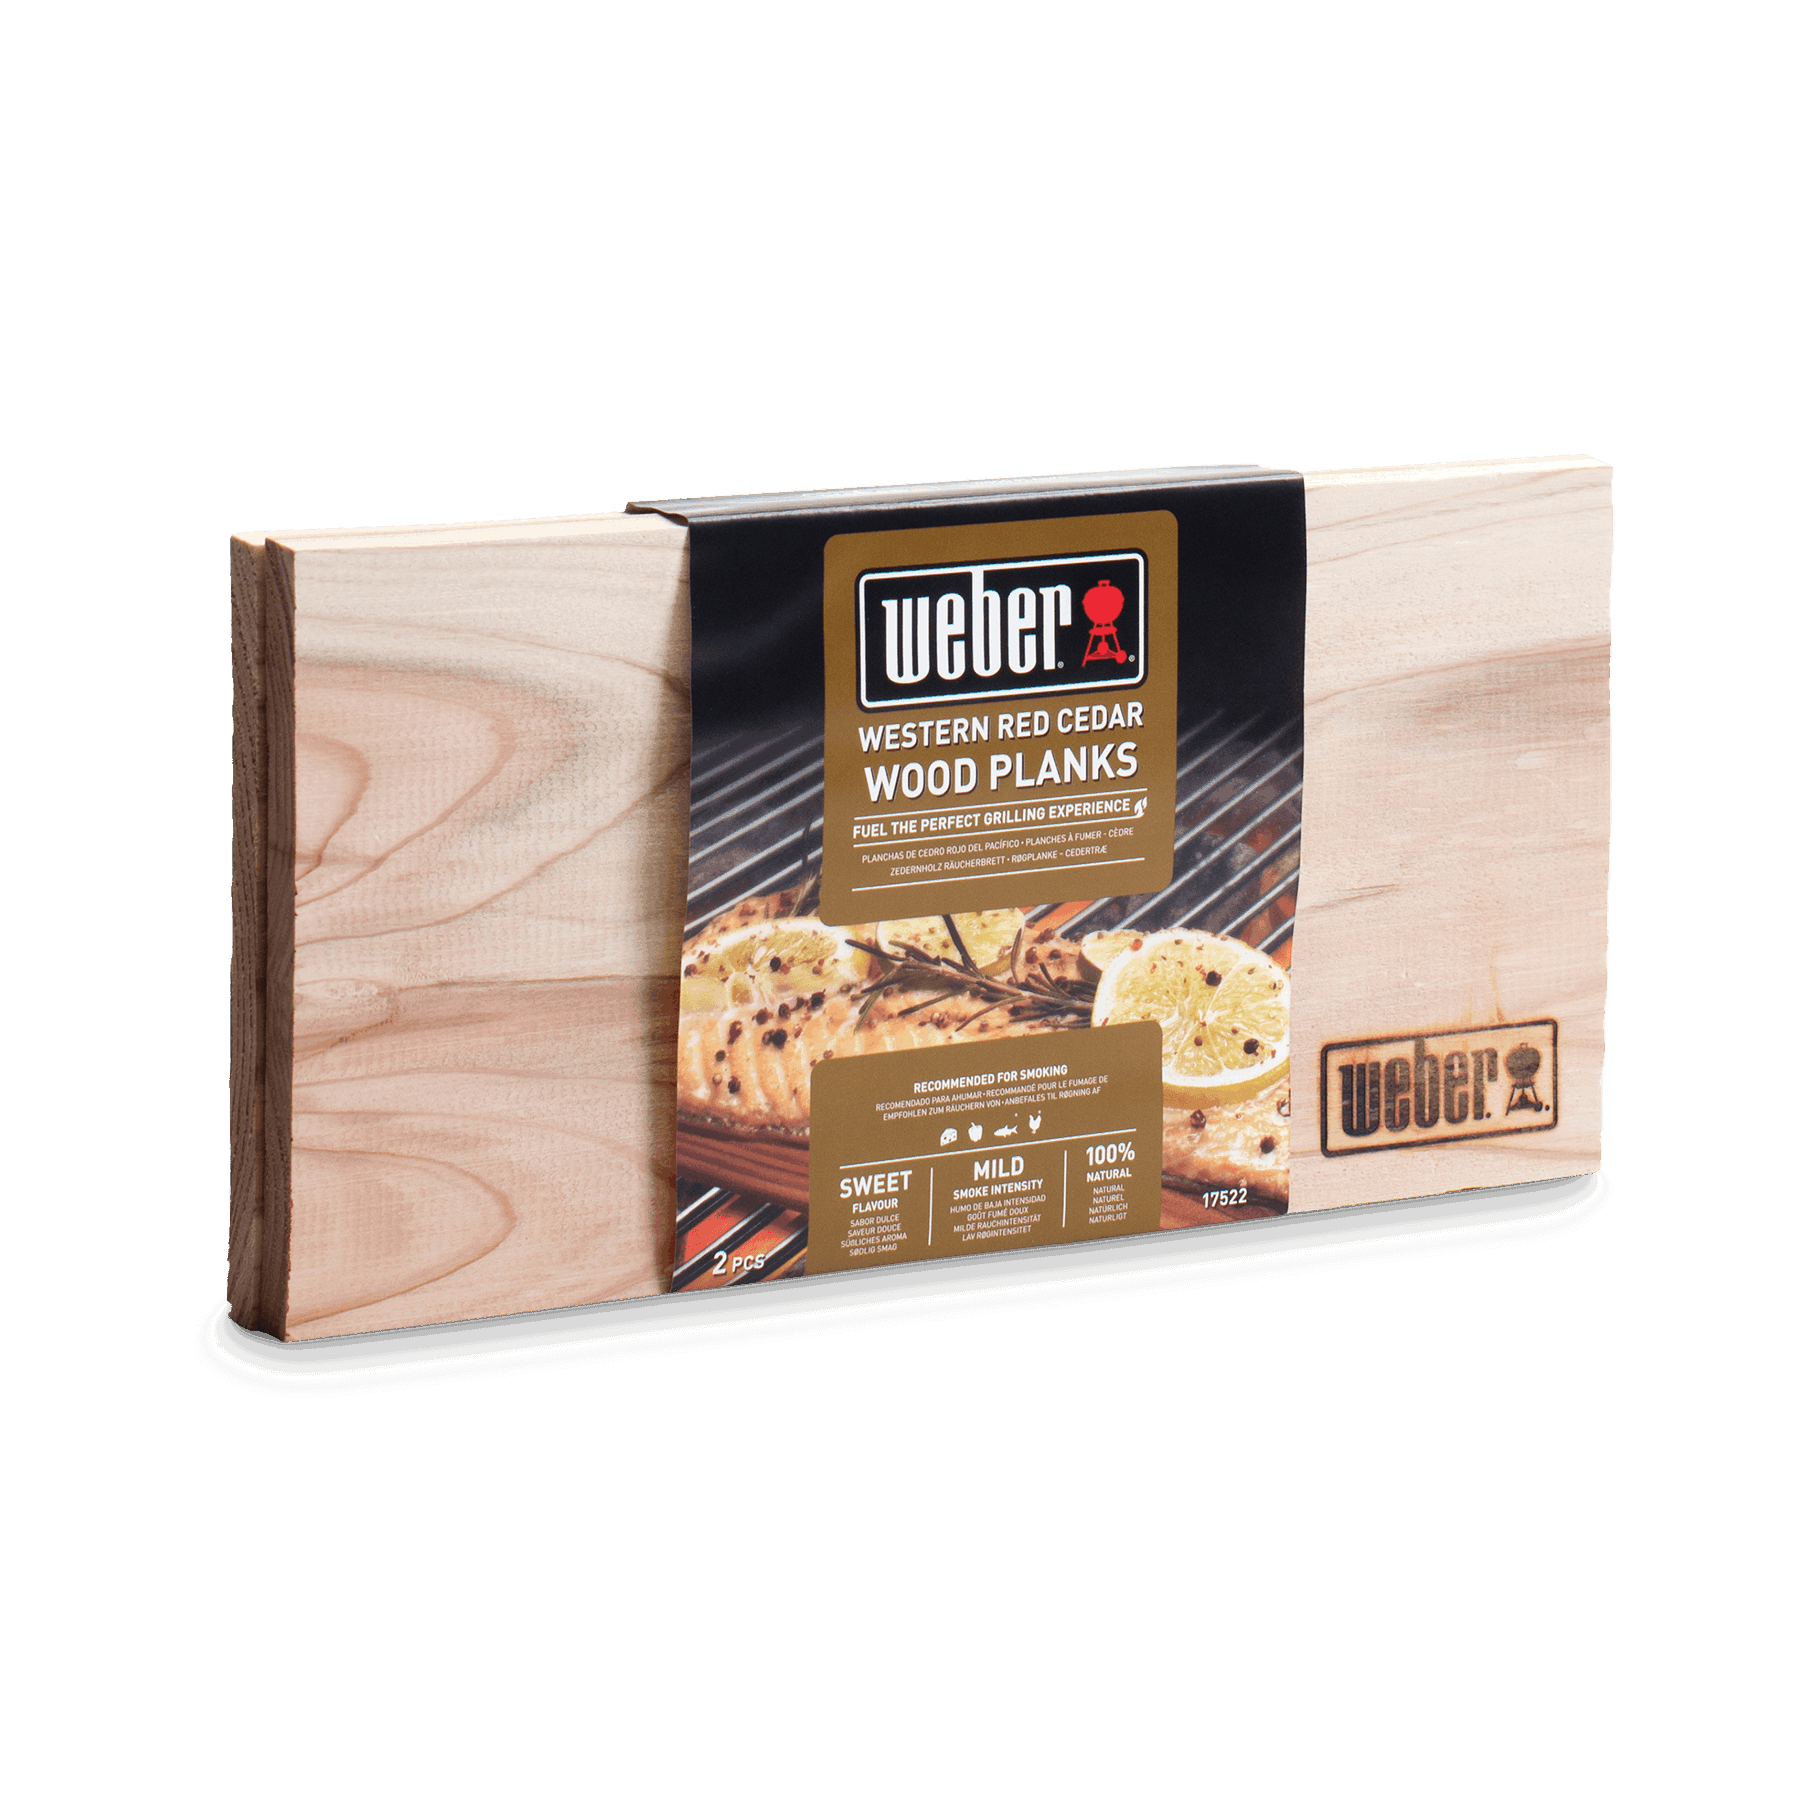 Case of 24 Western Red Cedar Grilling Planks 7.5 x 15 x 1/2 inch thick 